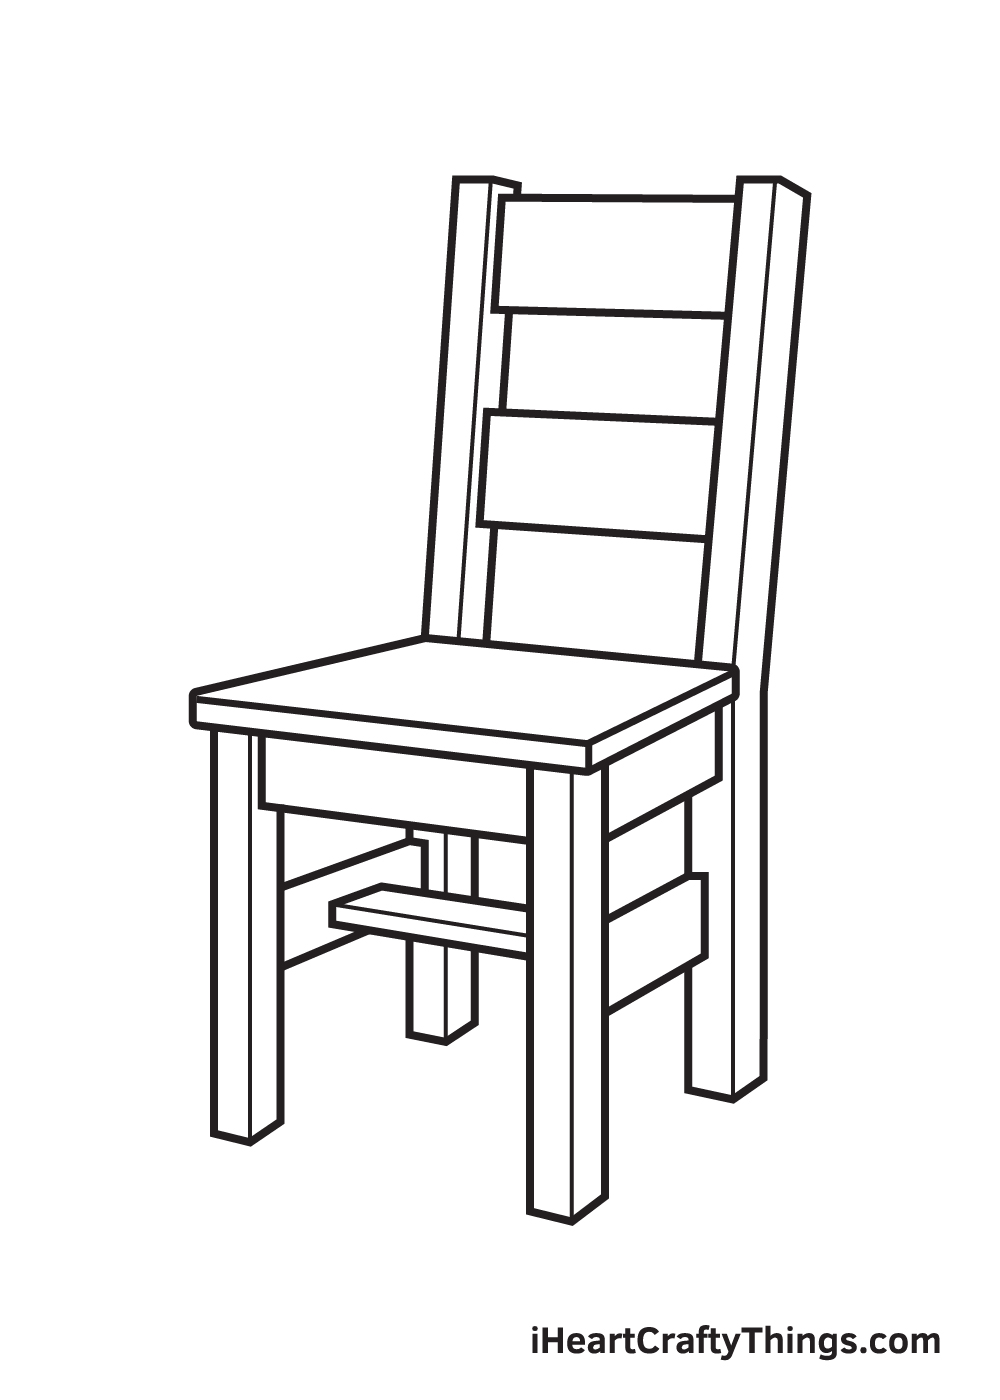 Drawing a chair - Step 9